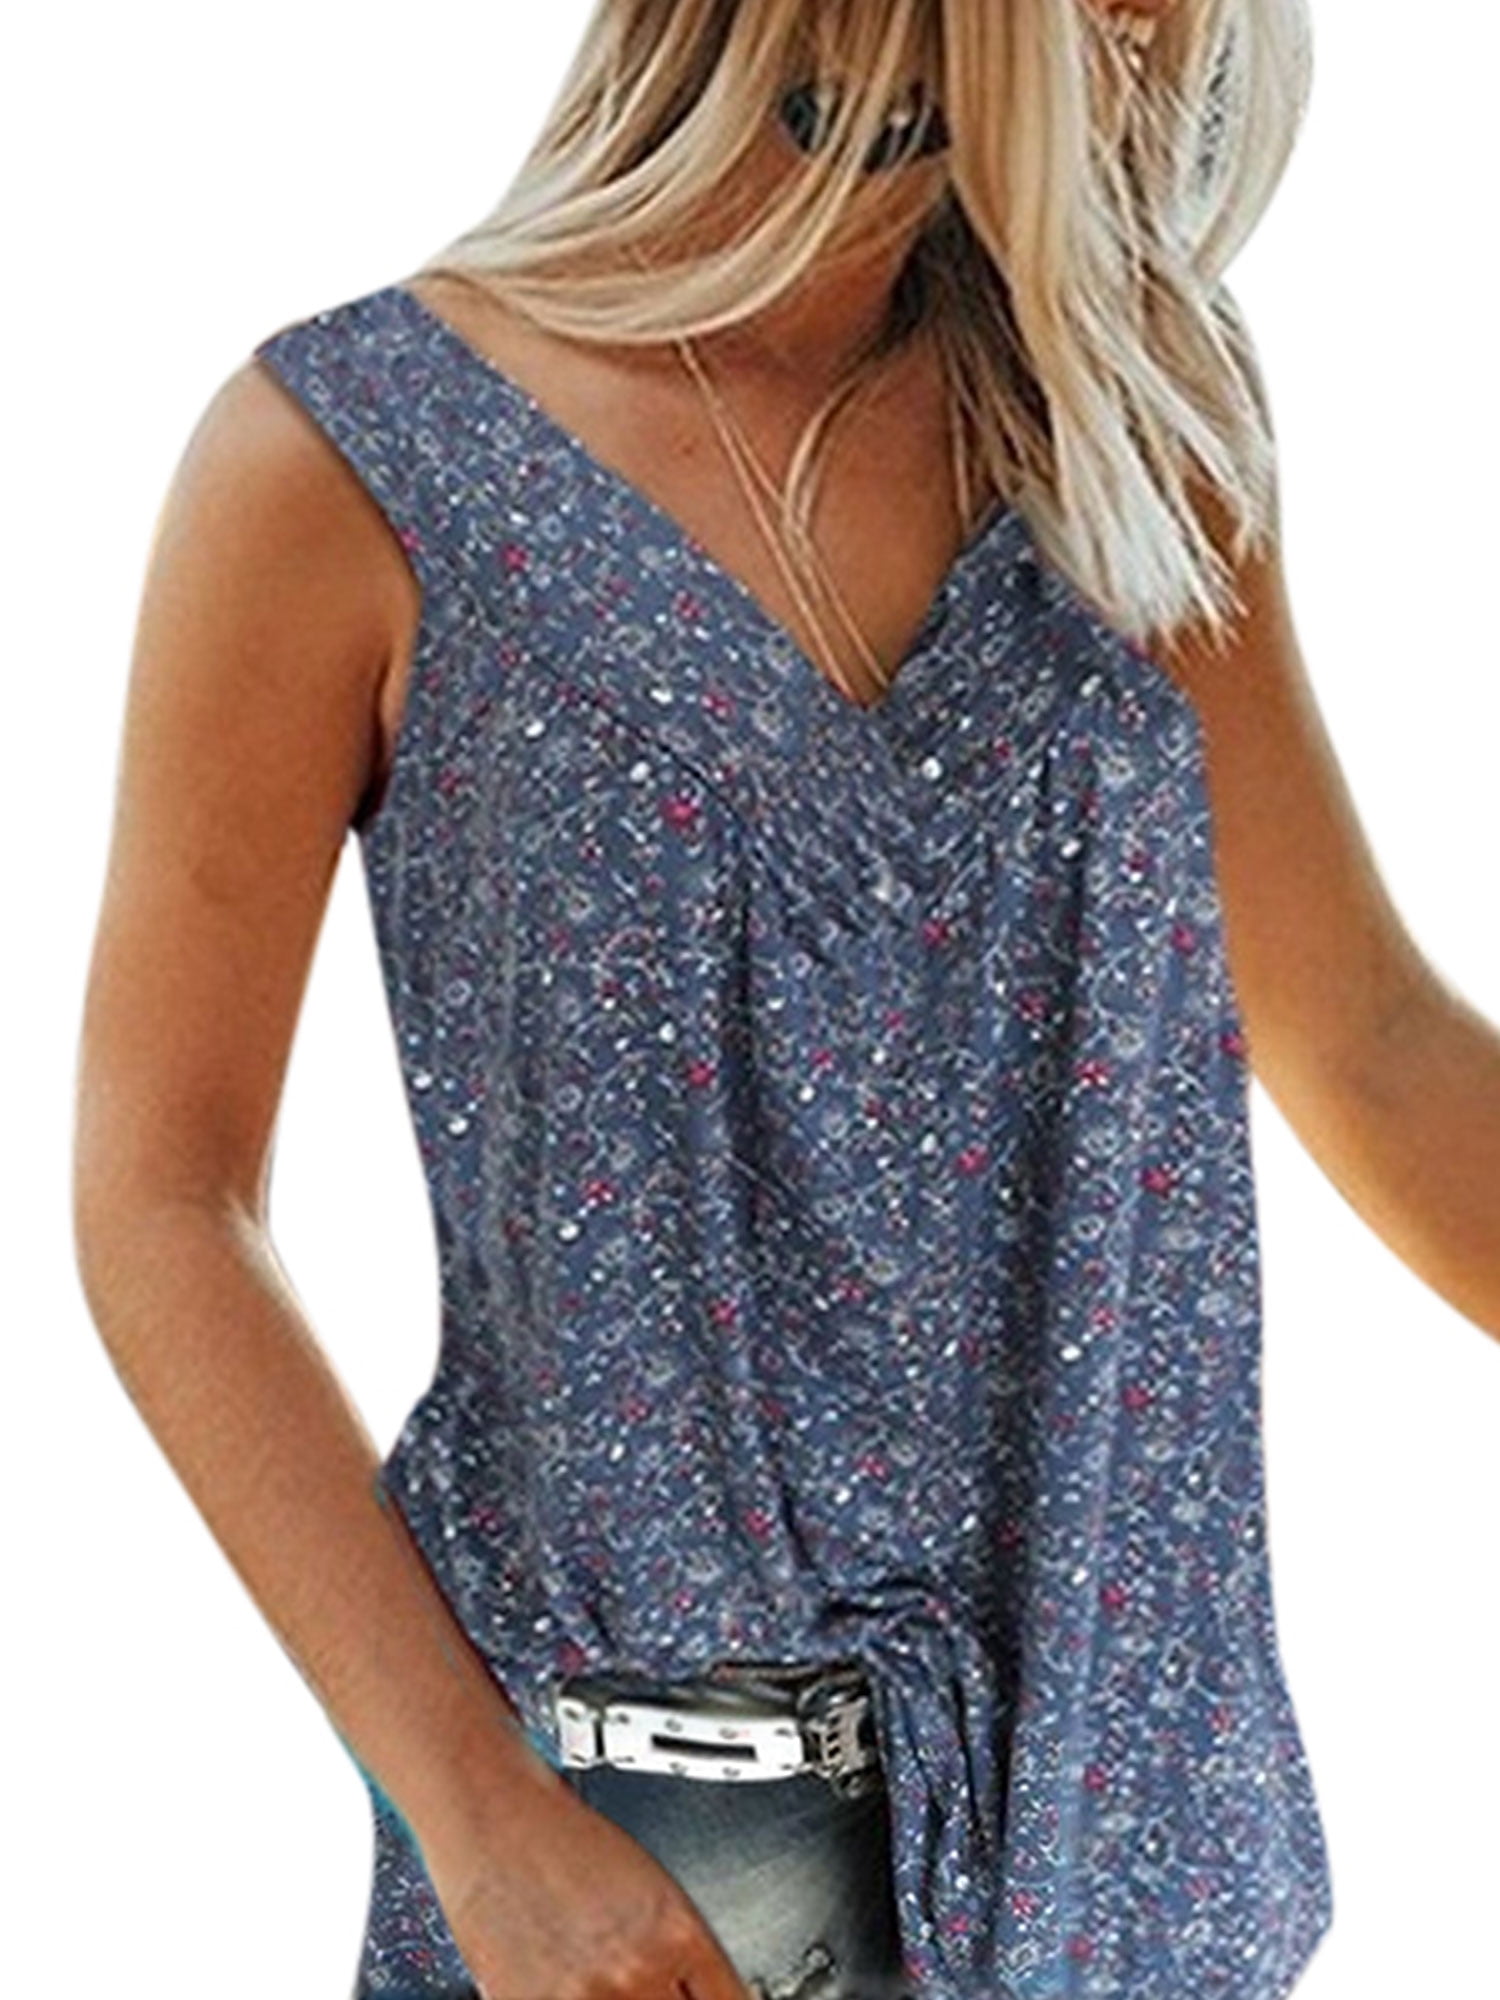 Fashion Womens Sleeveless Floral Summer Tank Tops Casual Blouse Loose T Shirt US